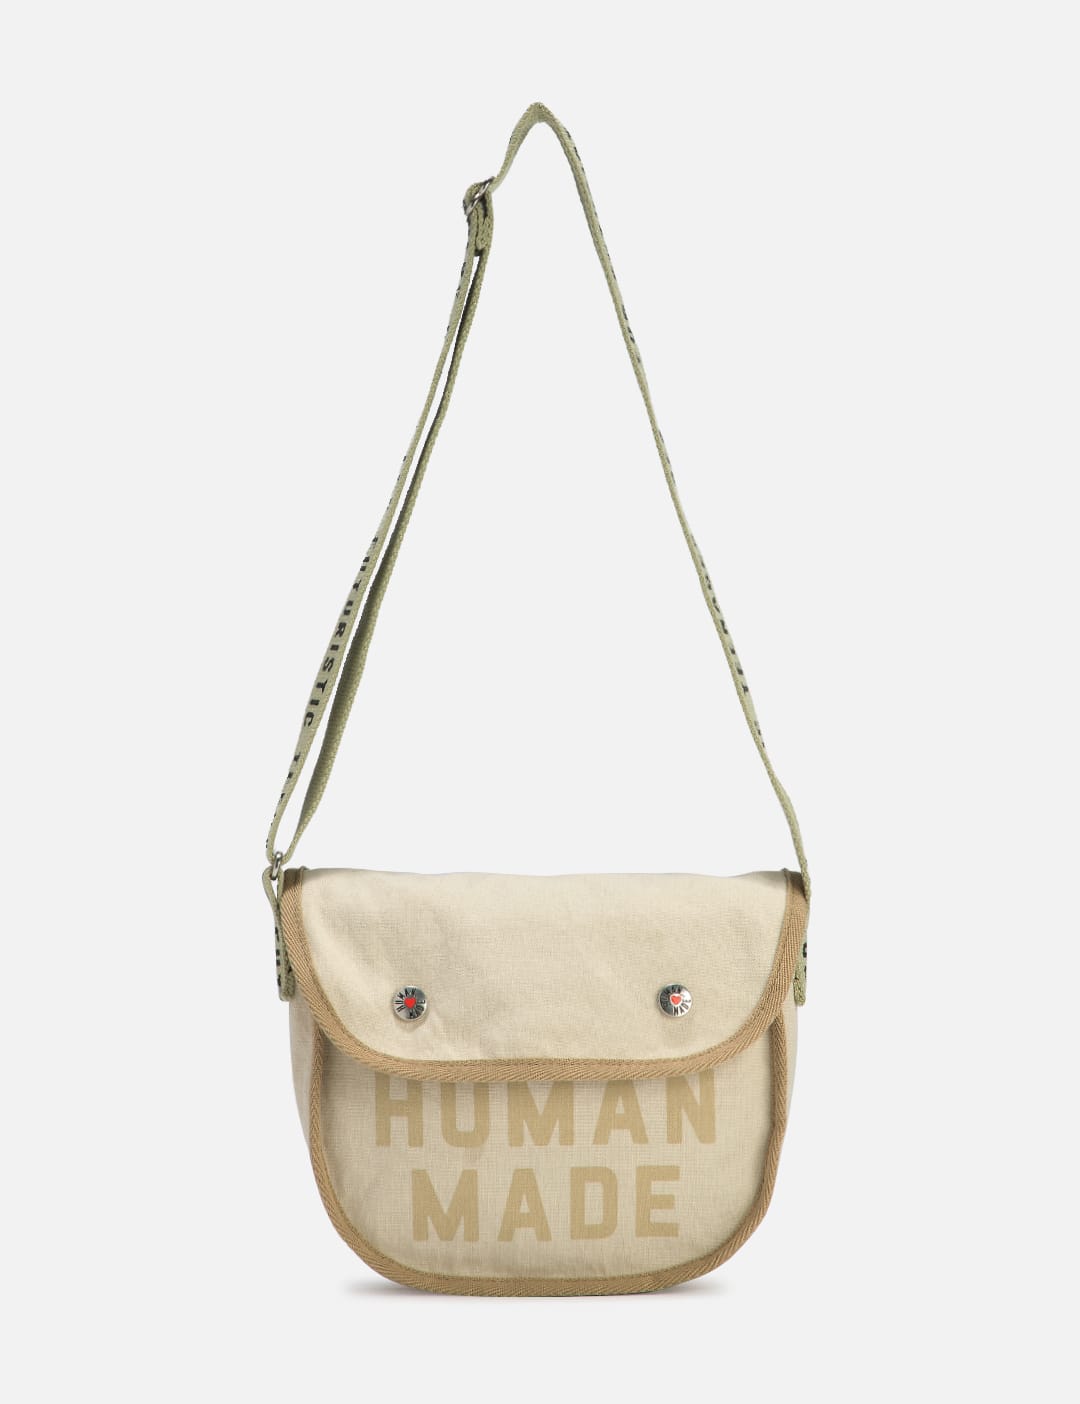 Human Made - Small Tool Bag | HBX - Globally Curated Fashion and 